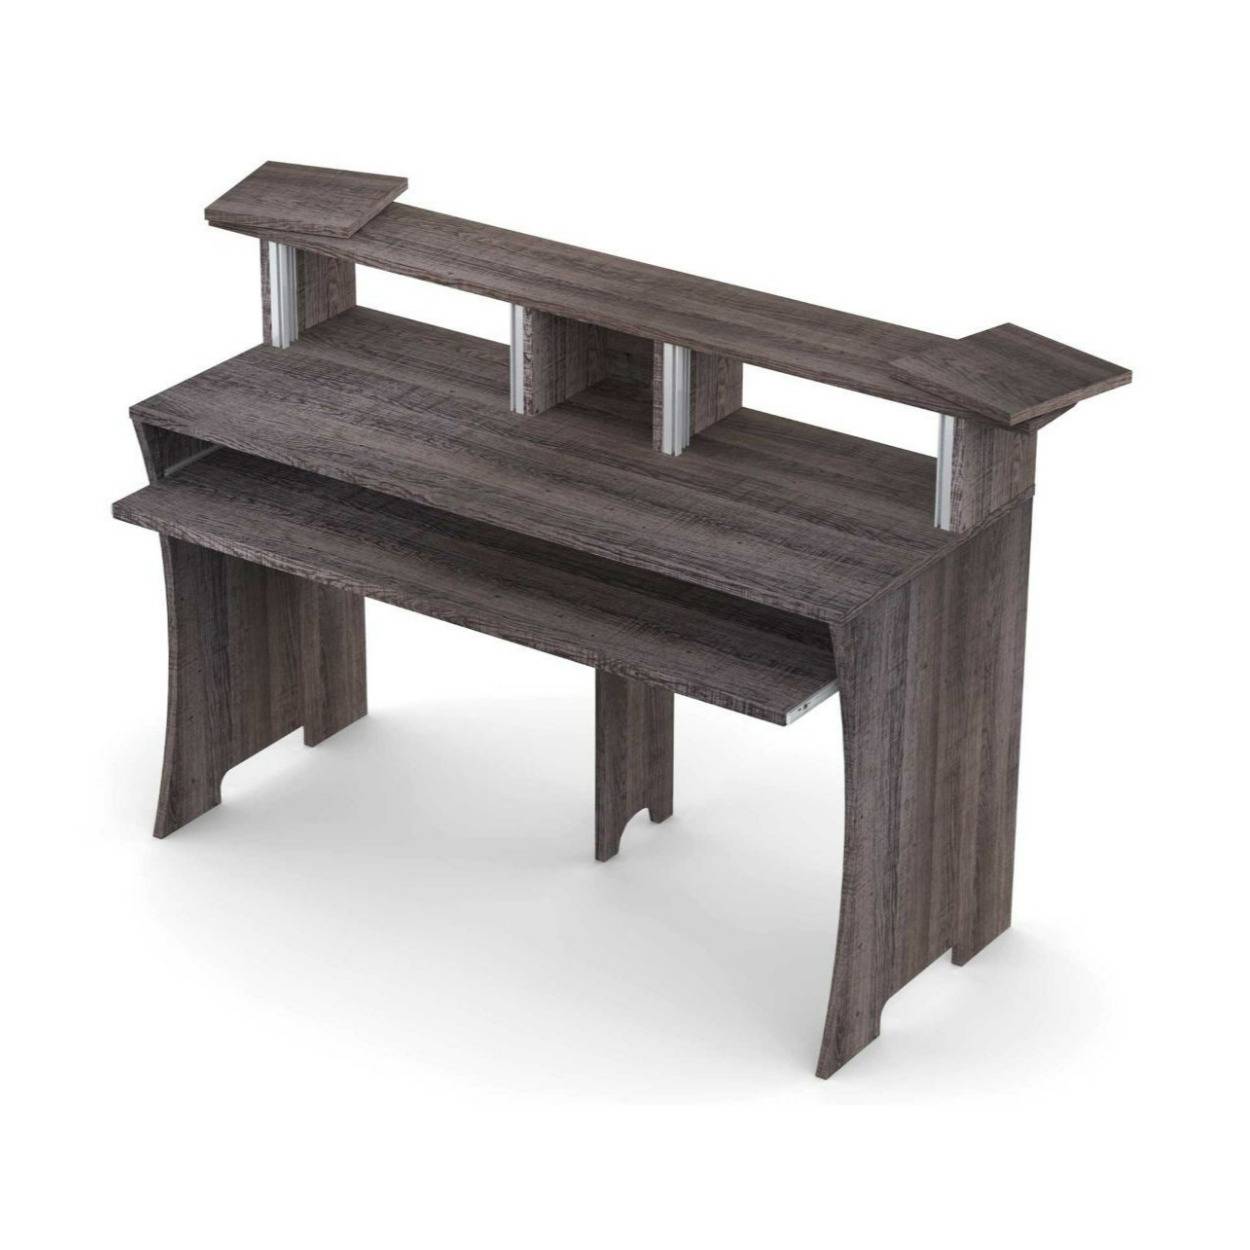 Glorious Workbench Multipurpose Working Console with Pull-Out Drawer (Driftwood) (Box 1 and 2)